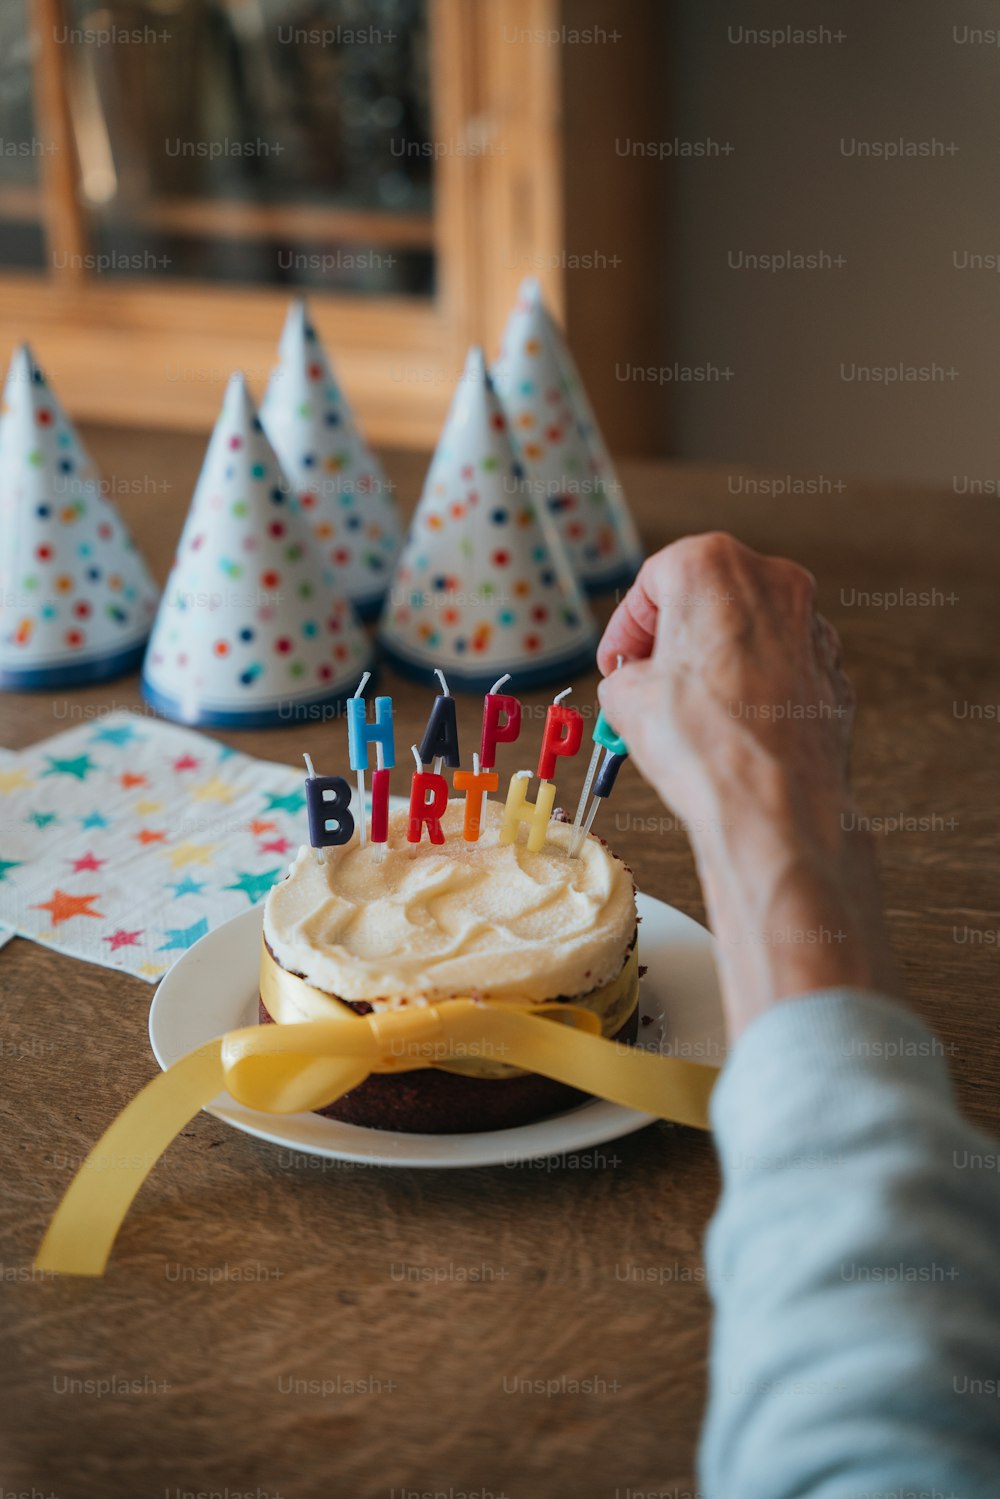 30k+ Birthday Girl Pictures  Download Free Images on Unsplash